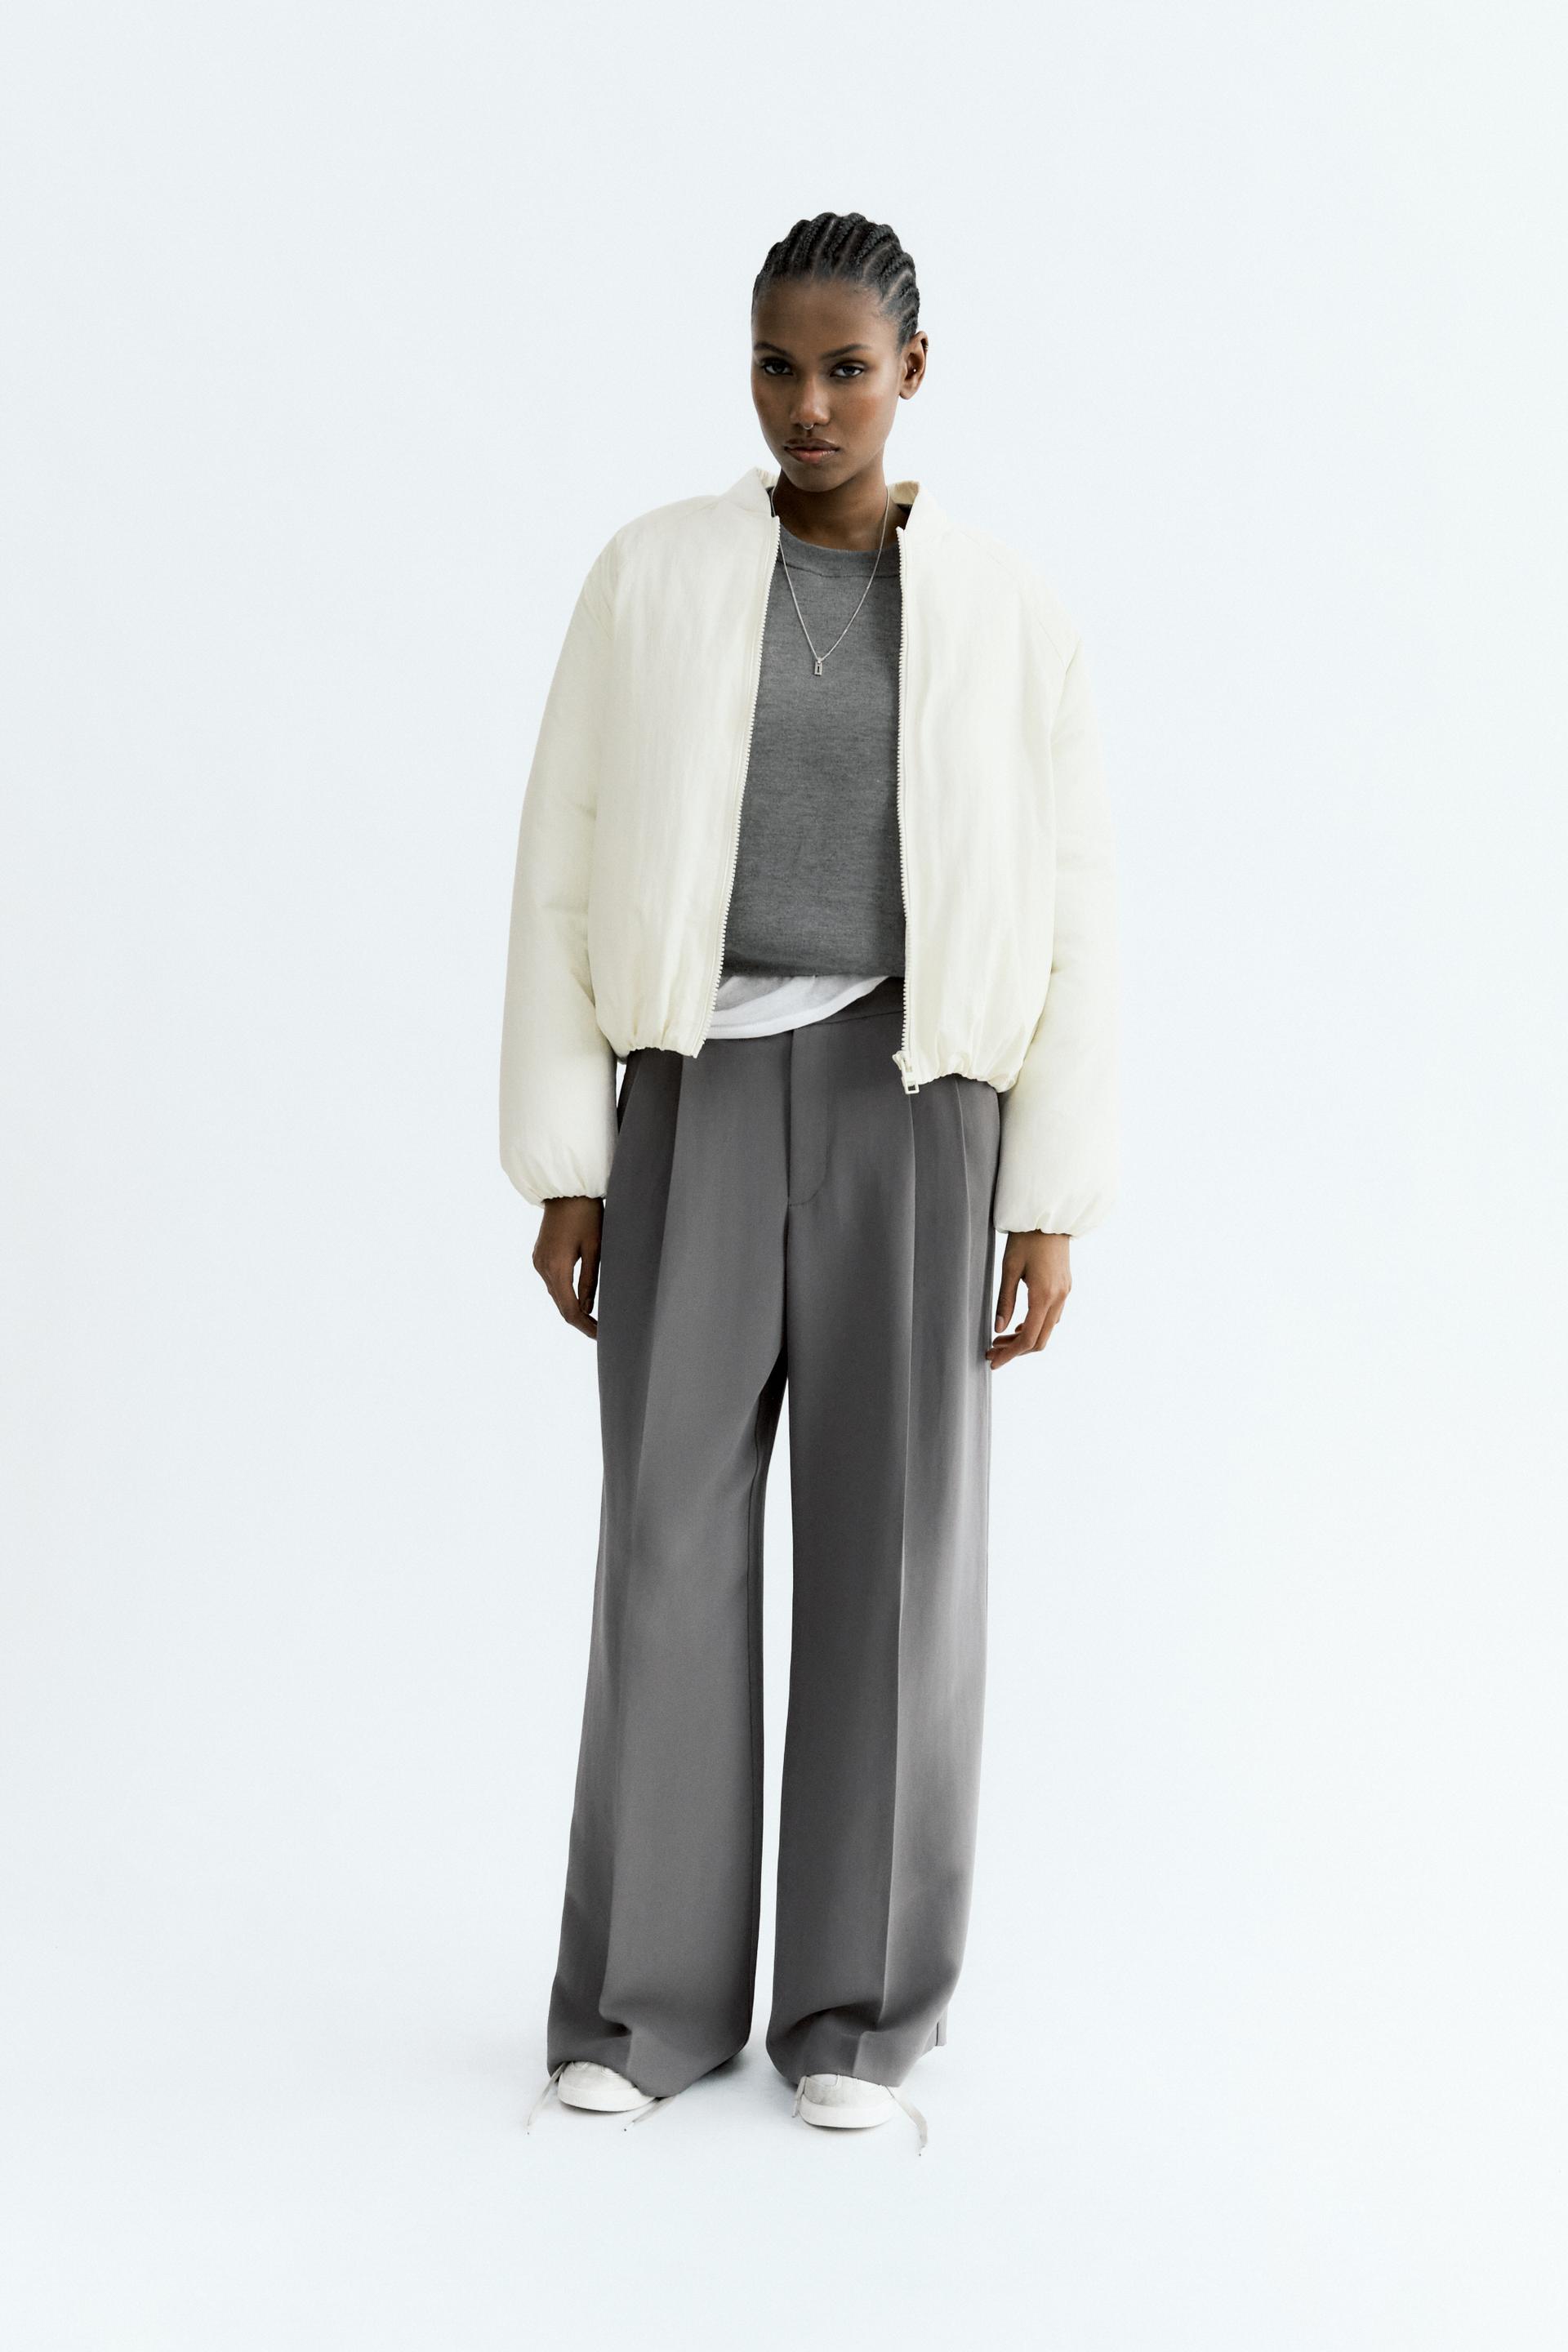 Zara + H&M + MNG + F21 + UNIQLO BHUTAN, ZARA 🤎 FAUX LEATHER TROUSERS  🏷️3590/- Sizes:XS-L MRP incl. of all taxes High-waist trousers with front  pockets. Front zip fly and